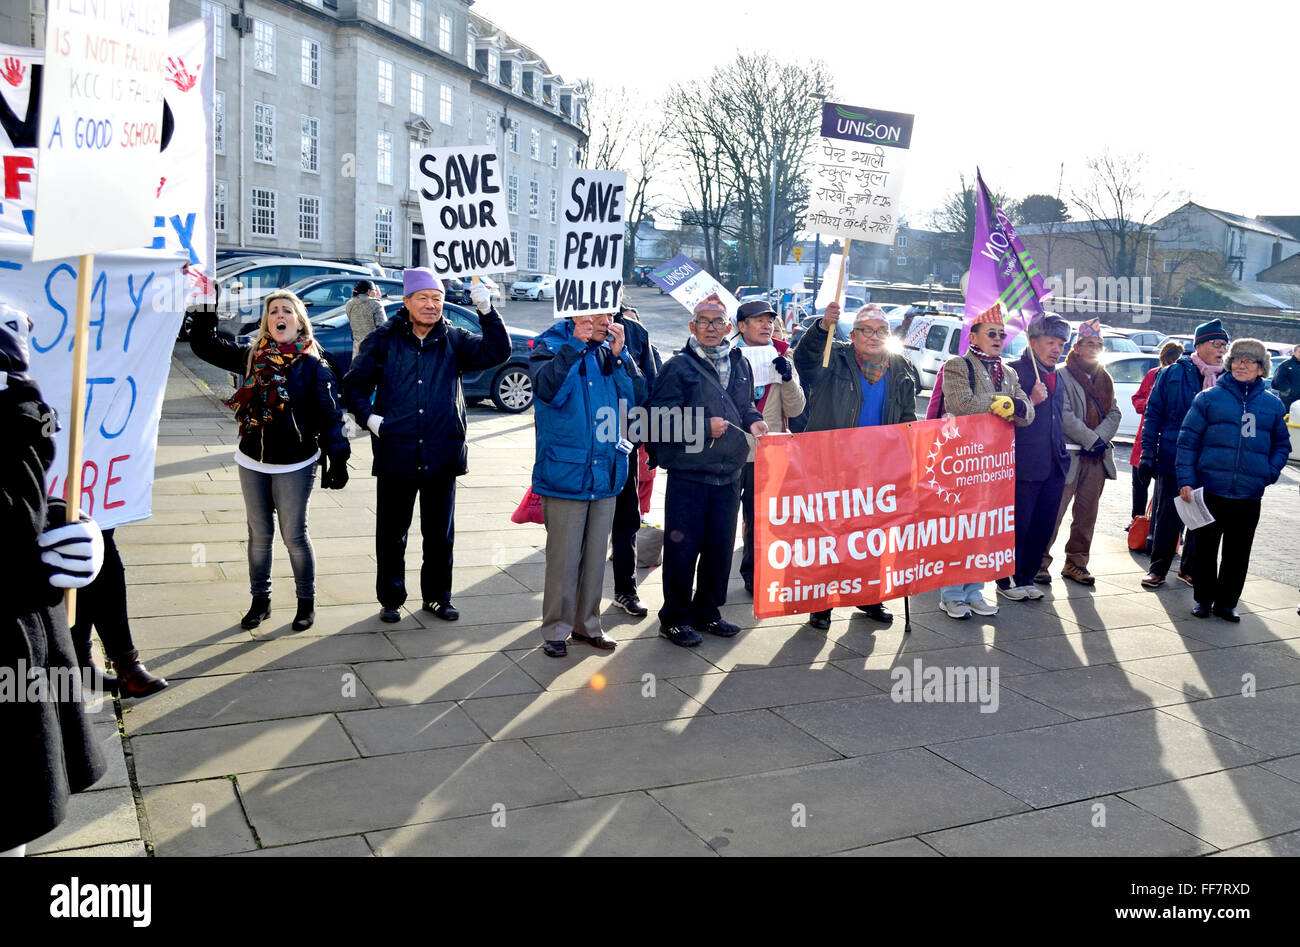 Maidstone, Kent, UK. 11th February, 2016. Protesters gather outside County Hall in Maidstone to greet Kent County Councillors before a vote on a budget including a 4% Council Tax rise and £80m pounds in cuts. Members of Unite are joined by campaigners against the closure of Pent Valley School, Folkestone and the Dorothy Lucy Day Care Centre Credit:  PjrNews/Alamy Live News Stock Photo